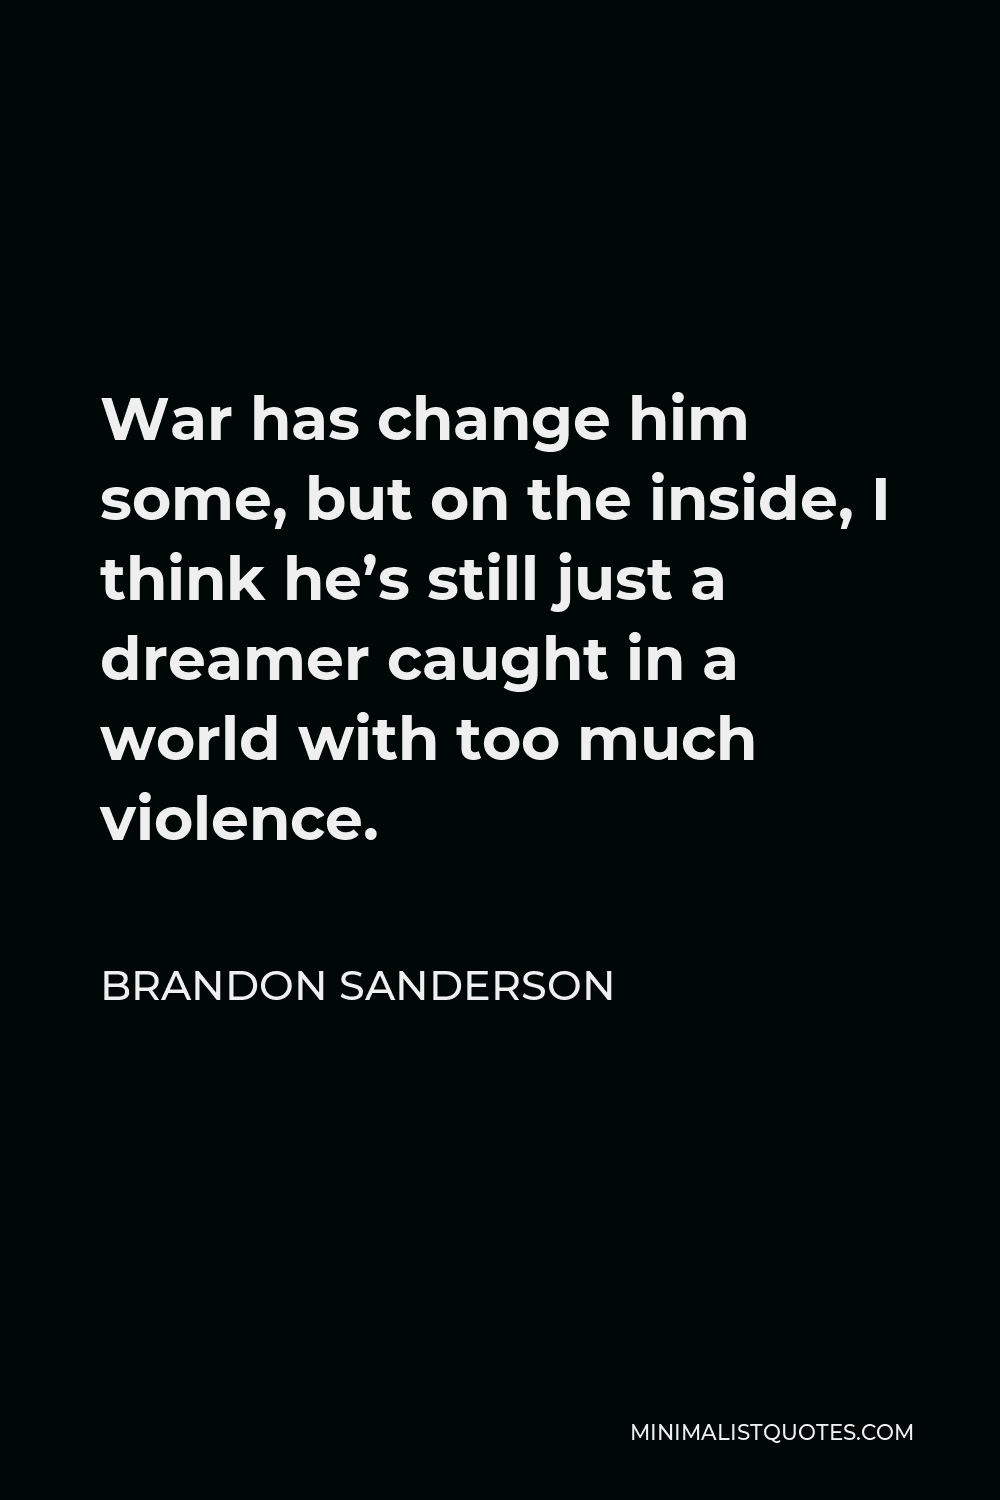 Brandon Sanderson Quote - War has change him some, but on the inside, I think he’s still just a dreamer caught in a world with too much violence.